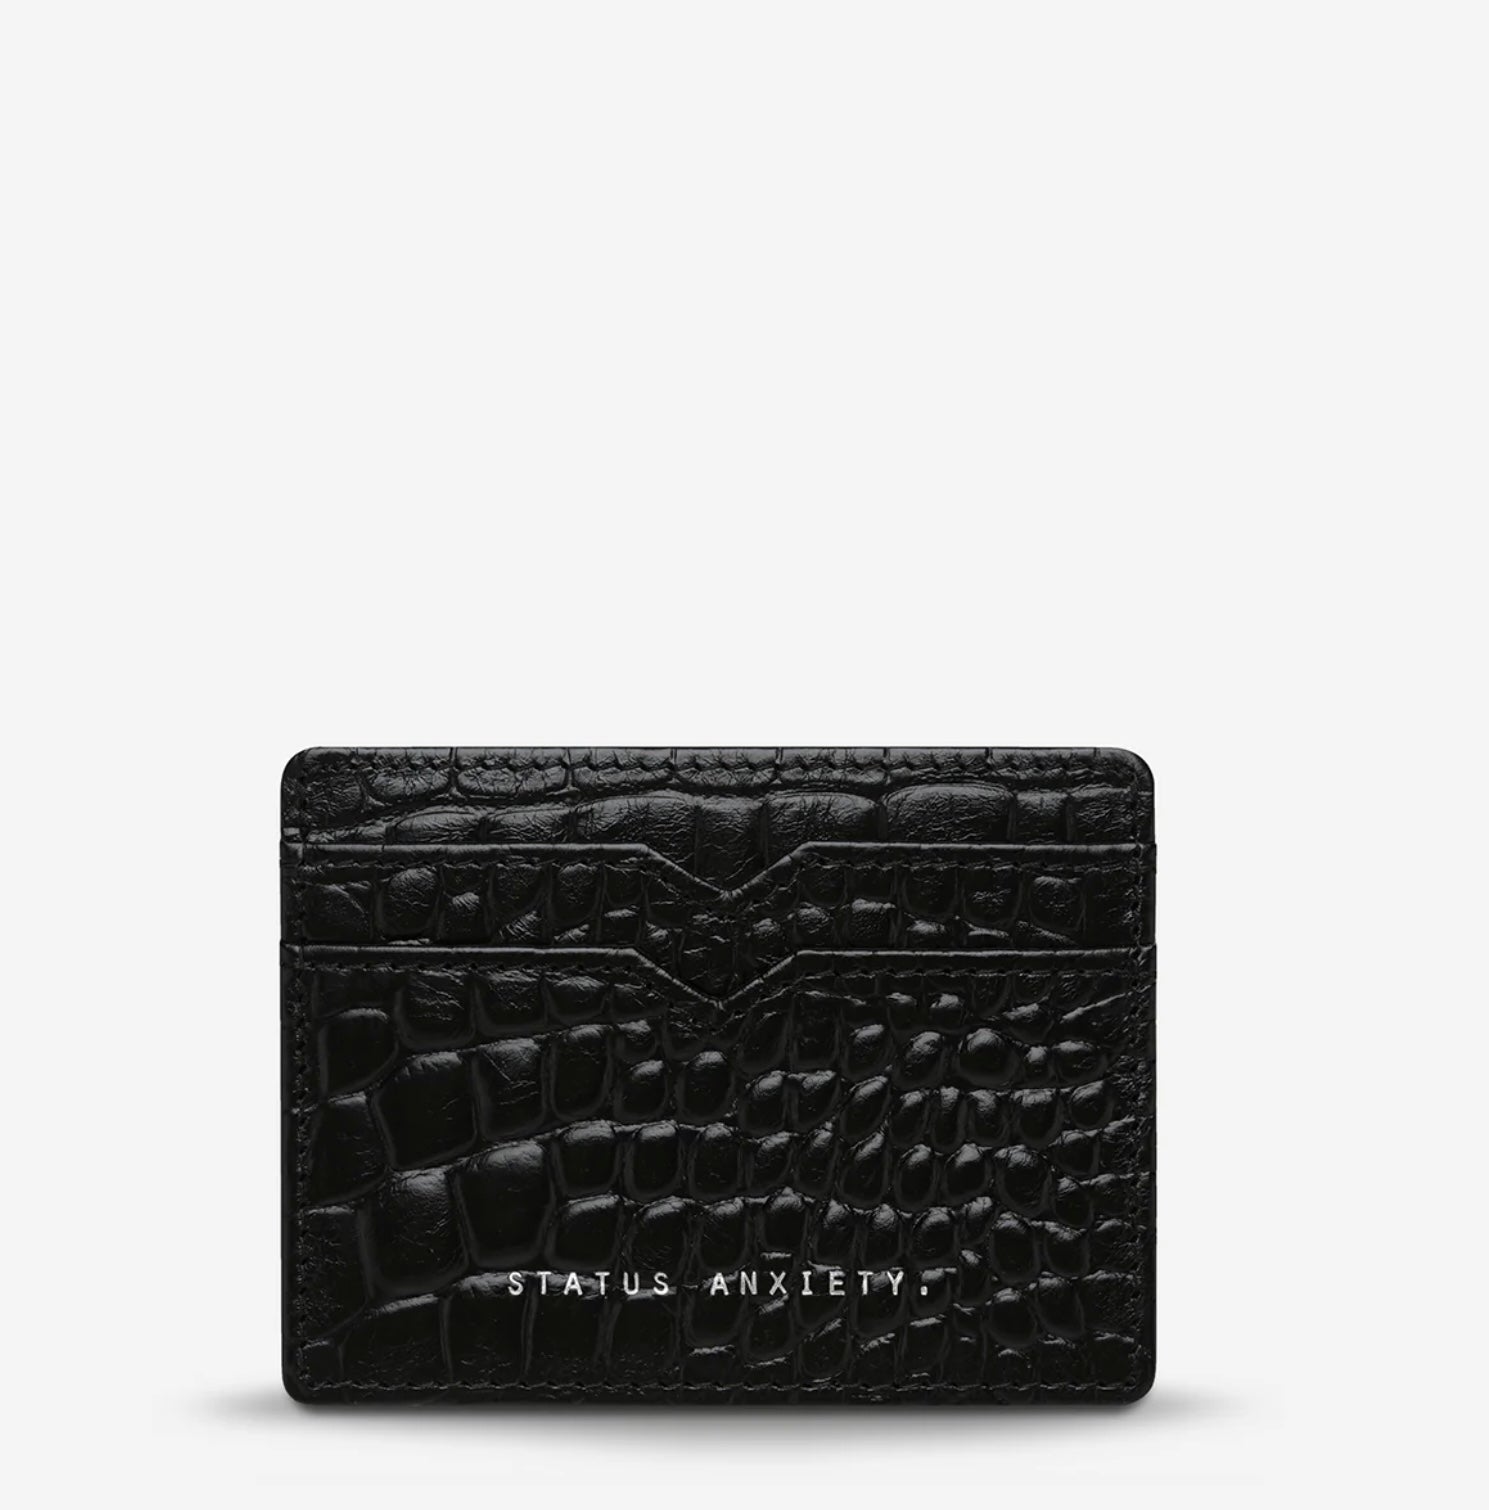 Status Anxiety II TOGETHER For Now Card Wallet - black croc